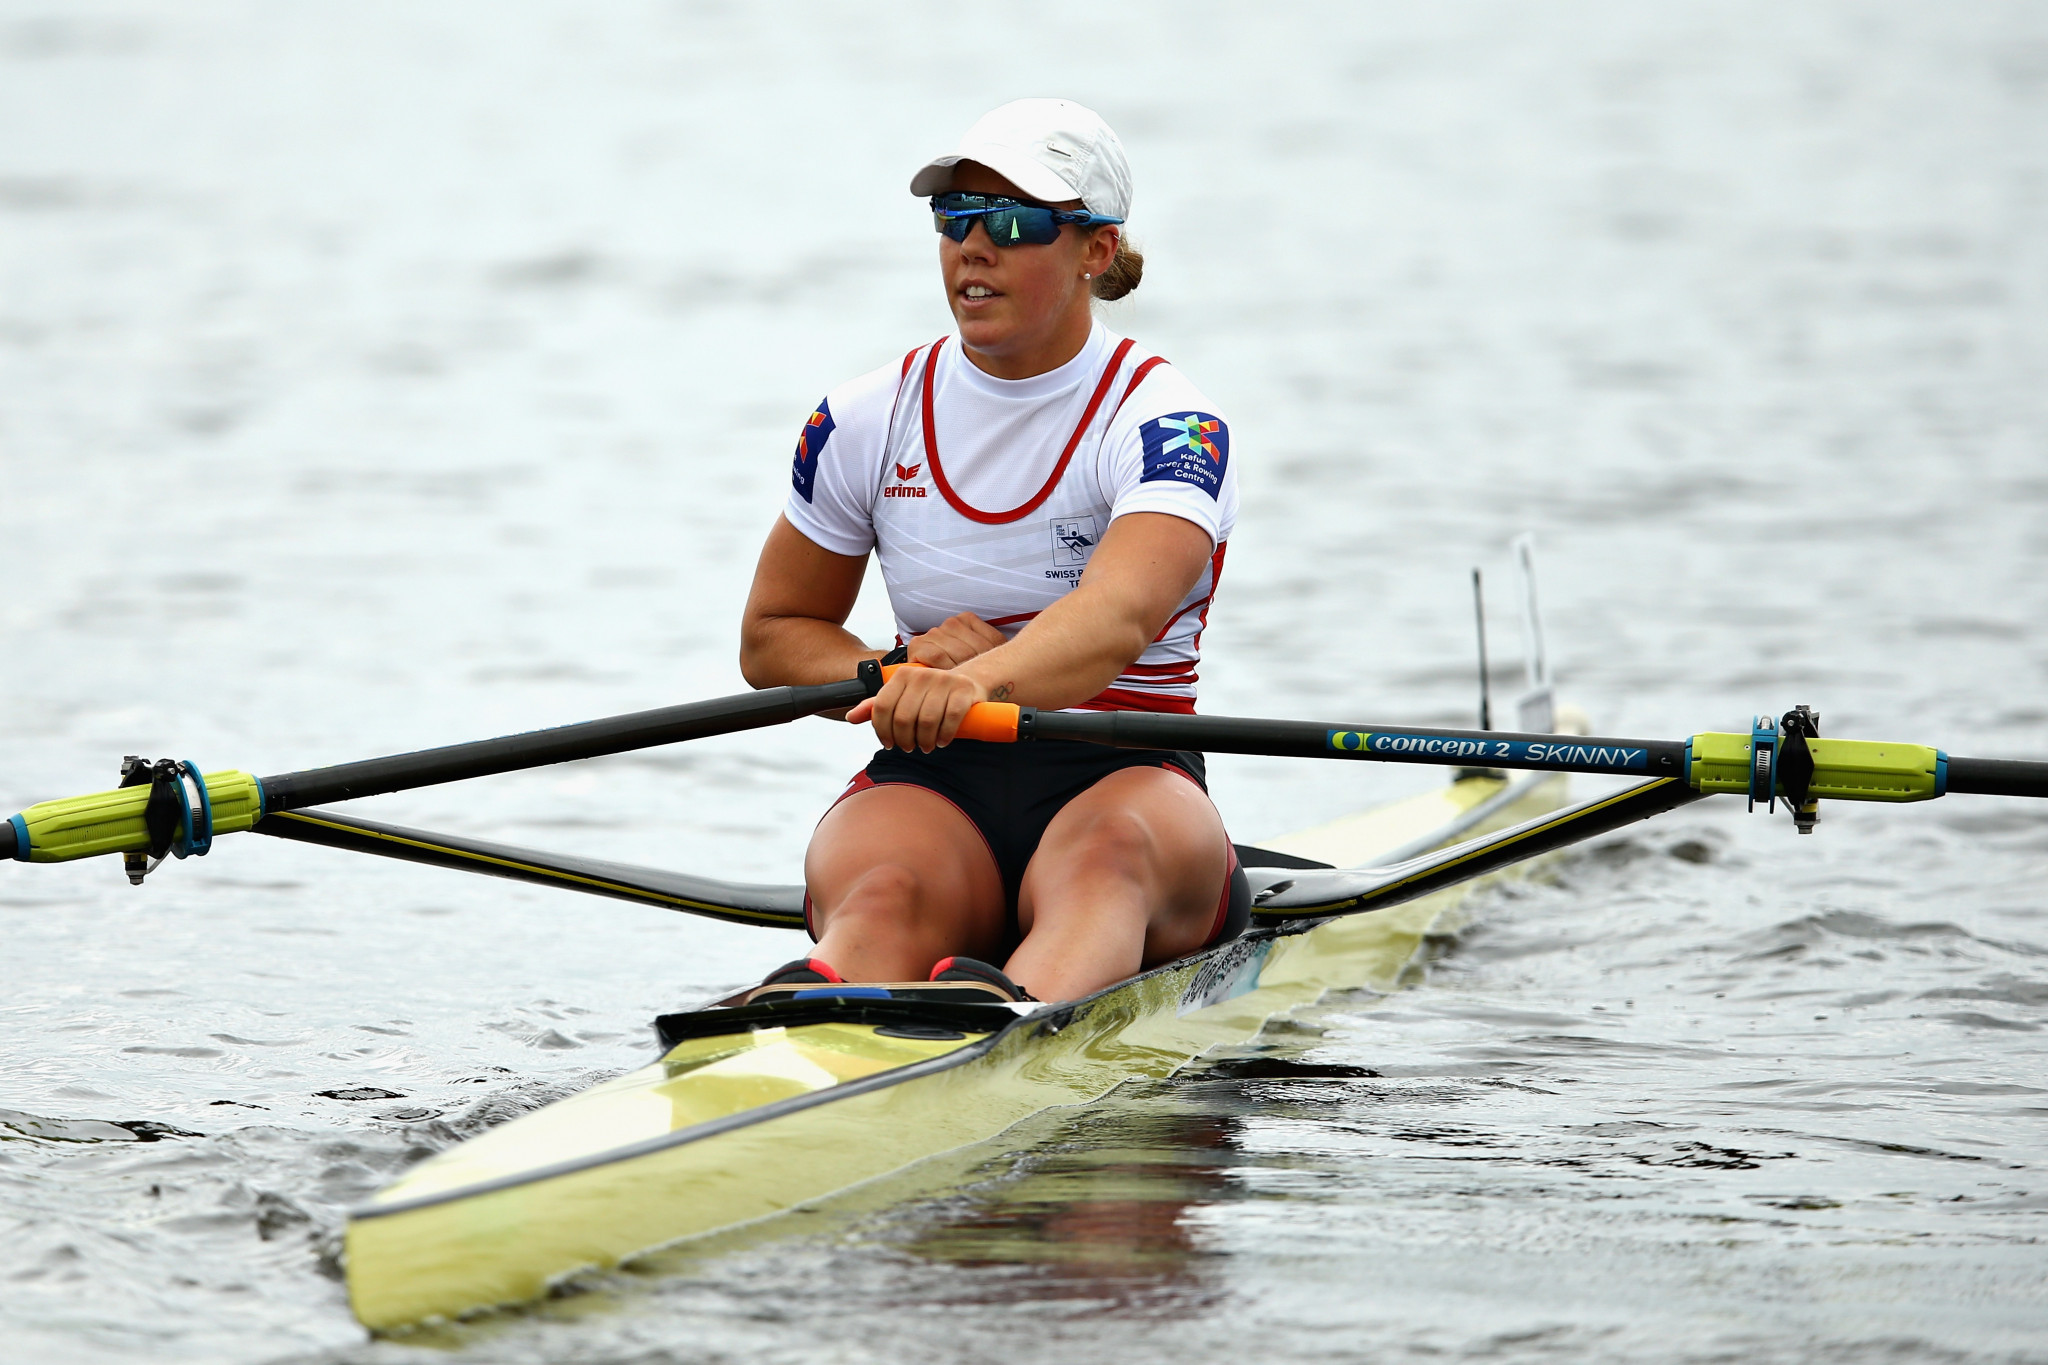  Gmelin looking good for single sculls home gold at European Rowing Championships in Lucerne